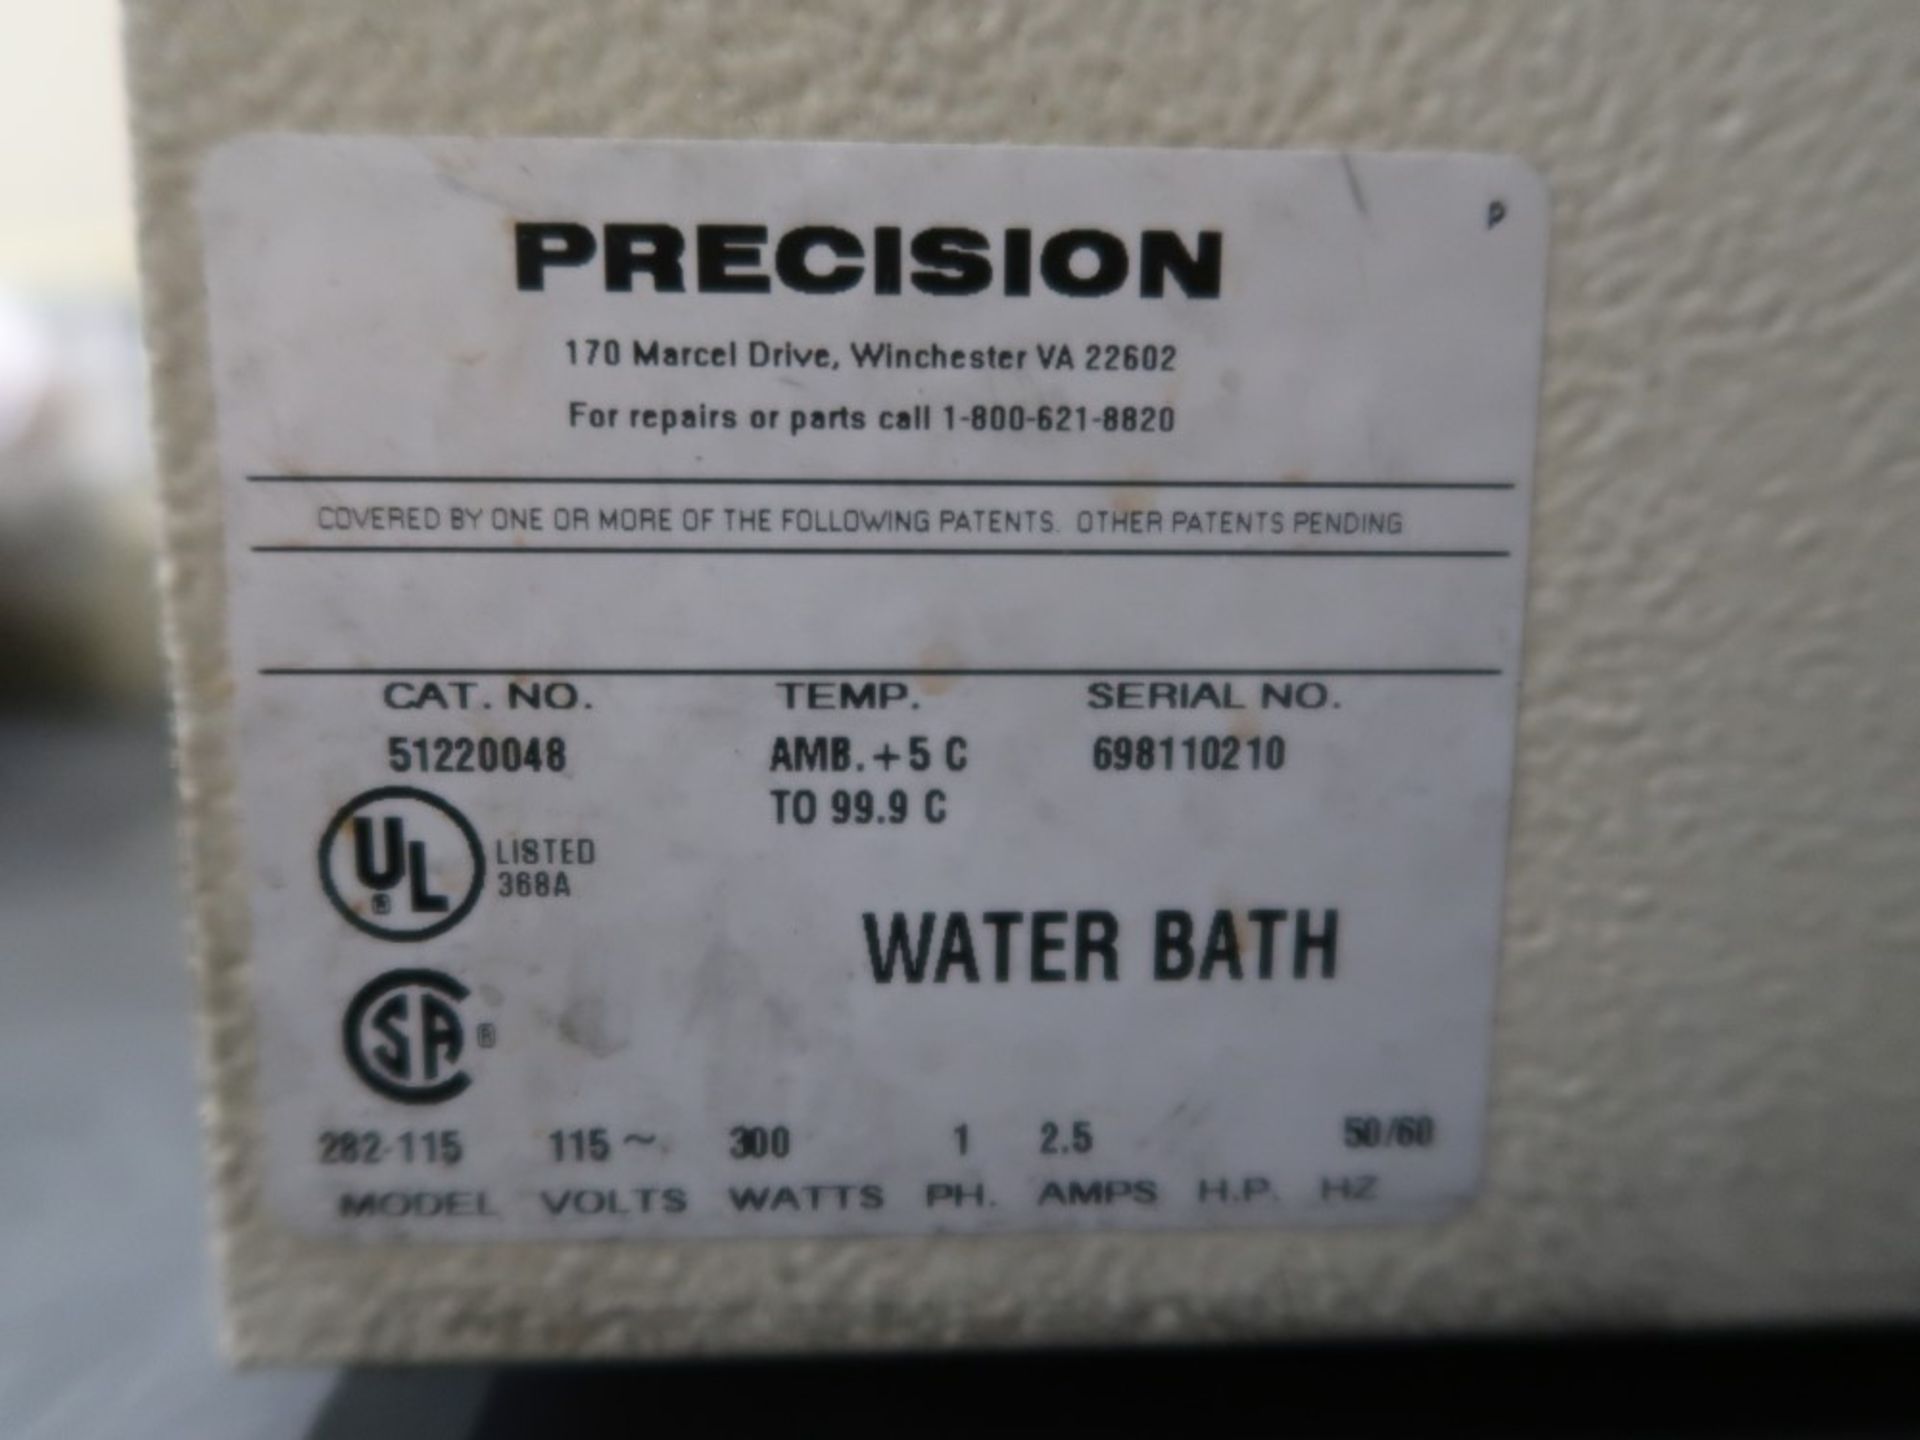 Precision Microprocessor Control 280 Series Water Bath S/N 698110210 Temp AMB +5 Degrees C to 99.9 - Image 3 of 3